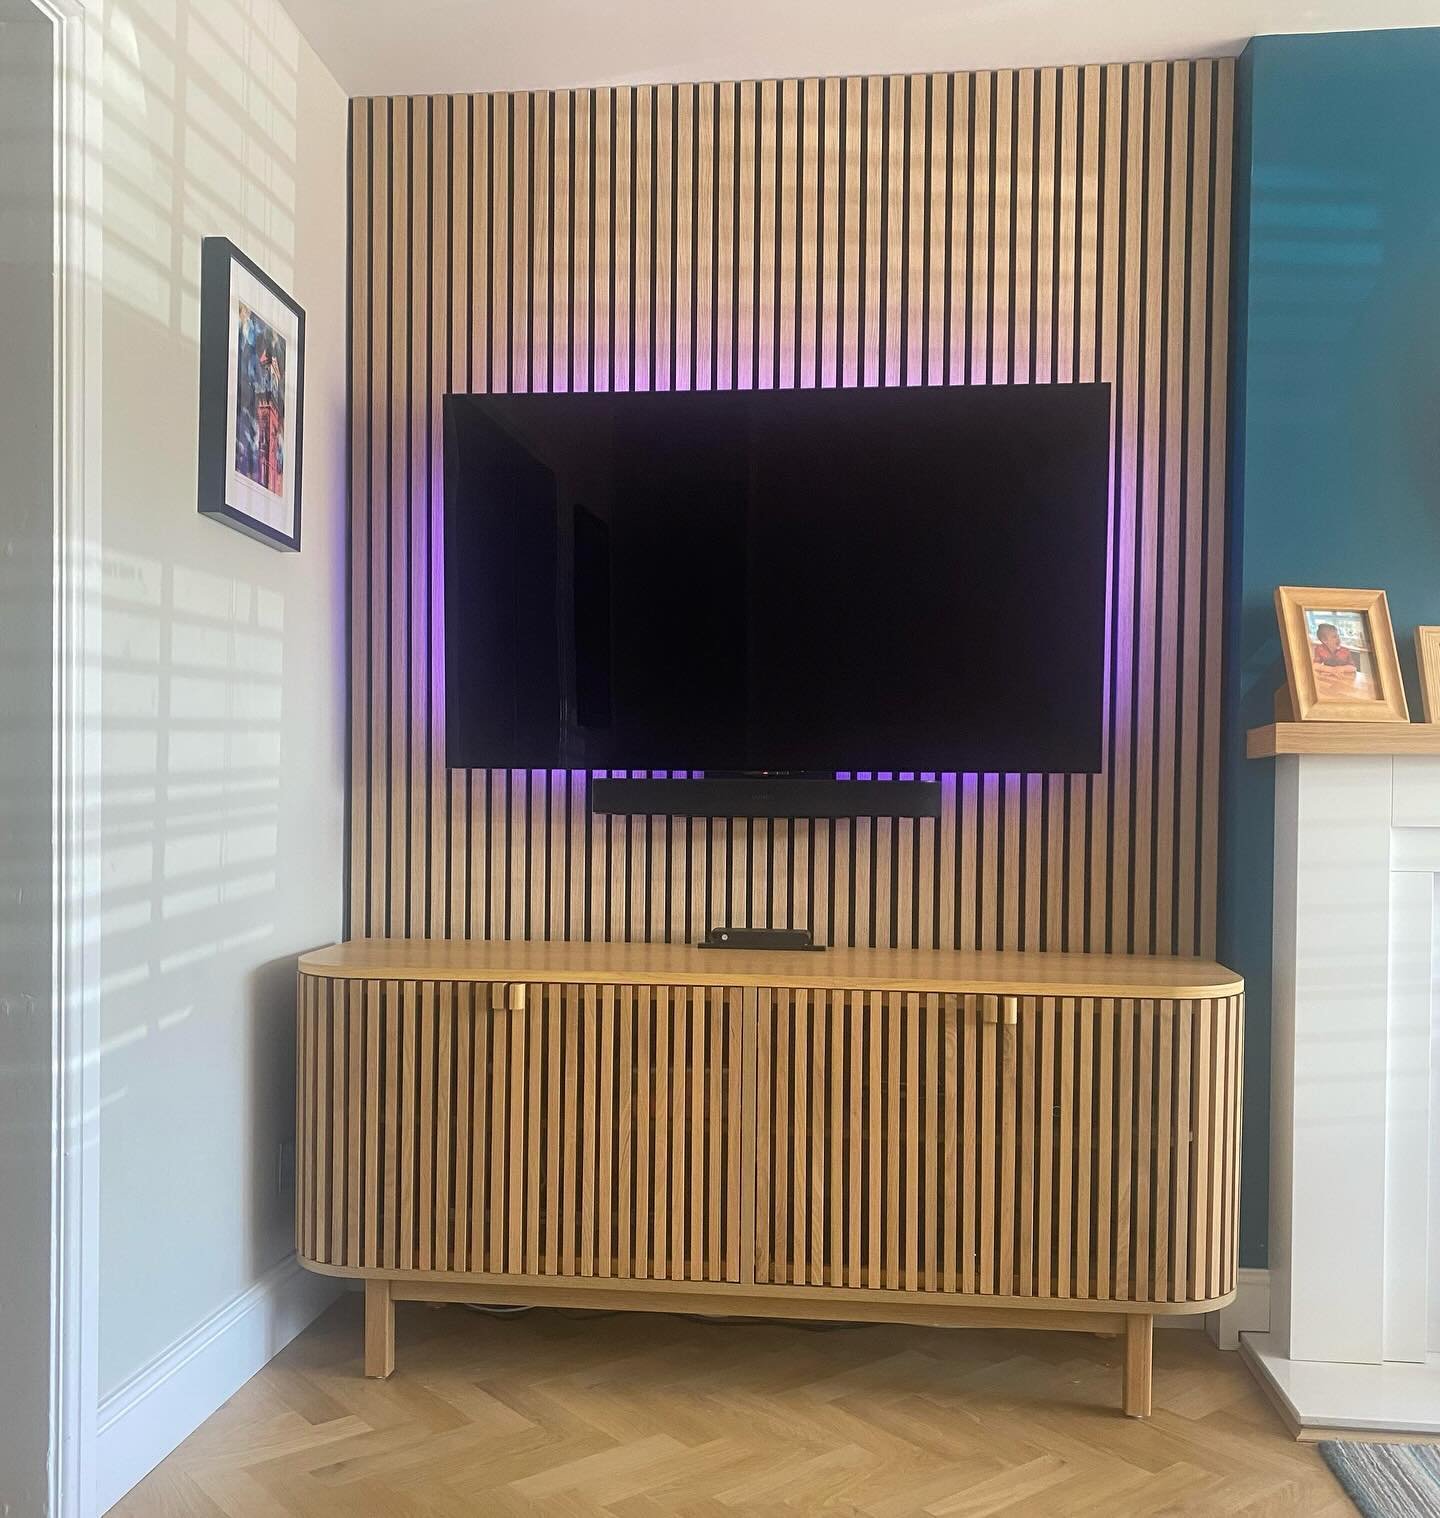 Feature Wall installation completed in Broughton Astley today.

If you are looking for a bespoke Feature Wall give us a call for a FREE quote.

Check us out at www.ultravision.info
Or call Pete on 07904 487 426

#mediawall #tvmediawall #tvwallmount #